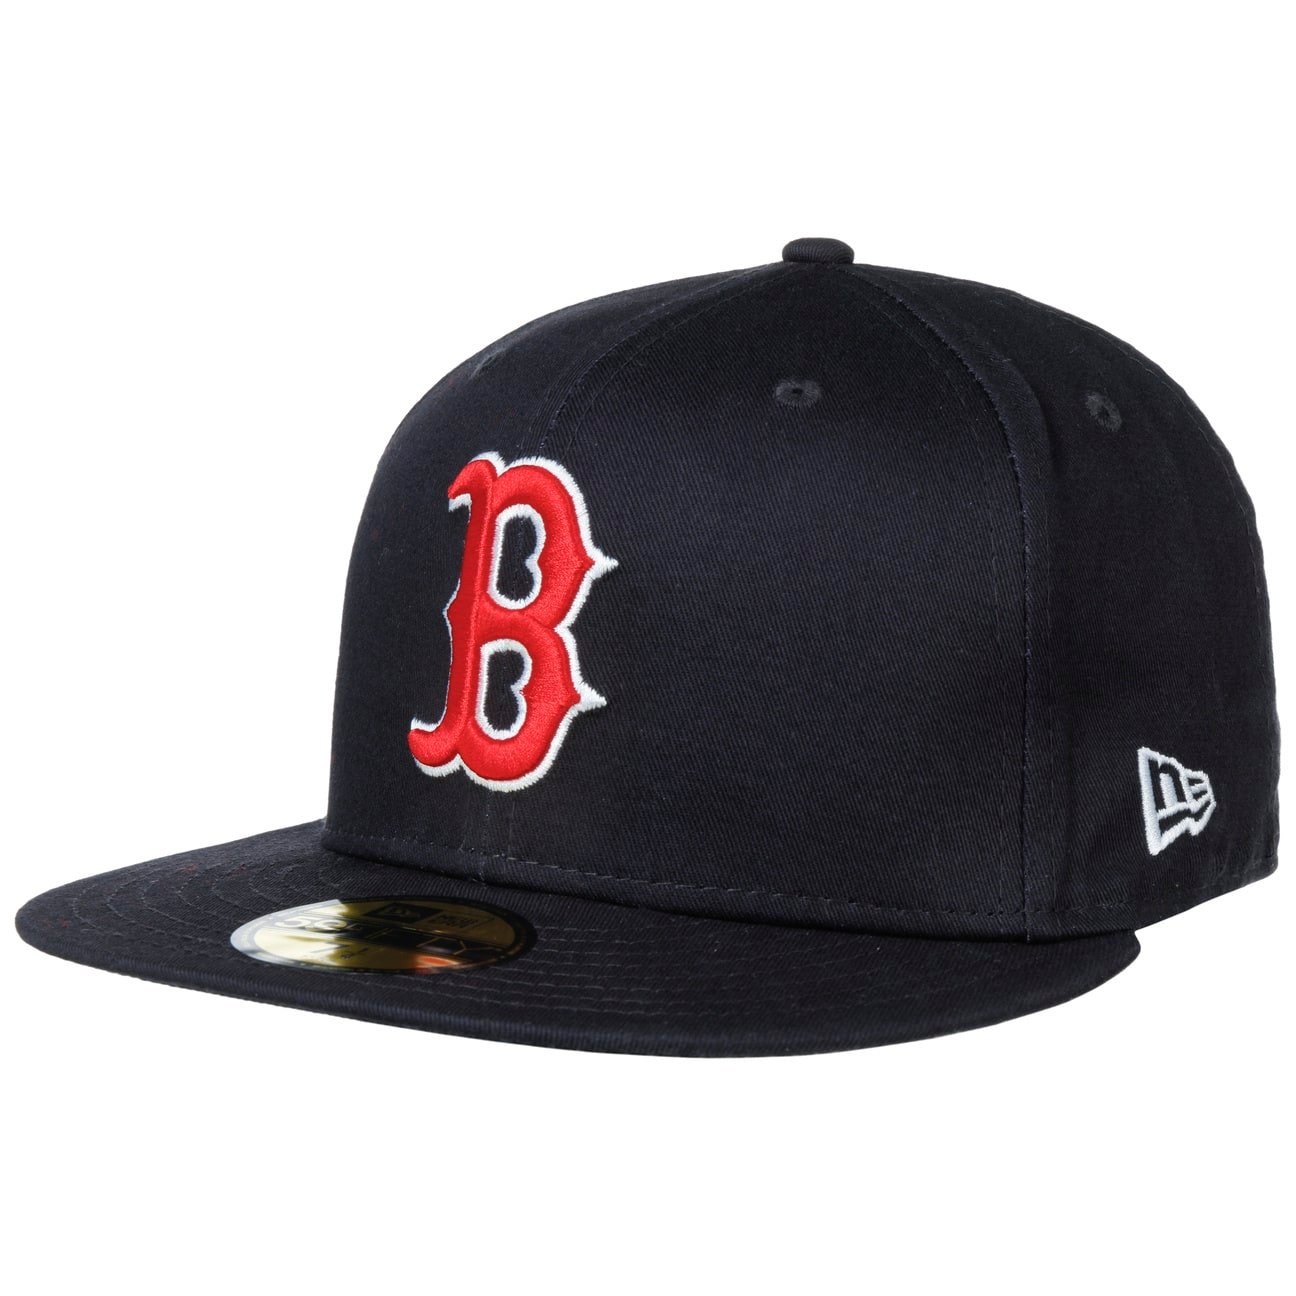 59Fifty MLB Red Sox Side Patch Cap by New Era von new era